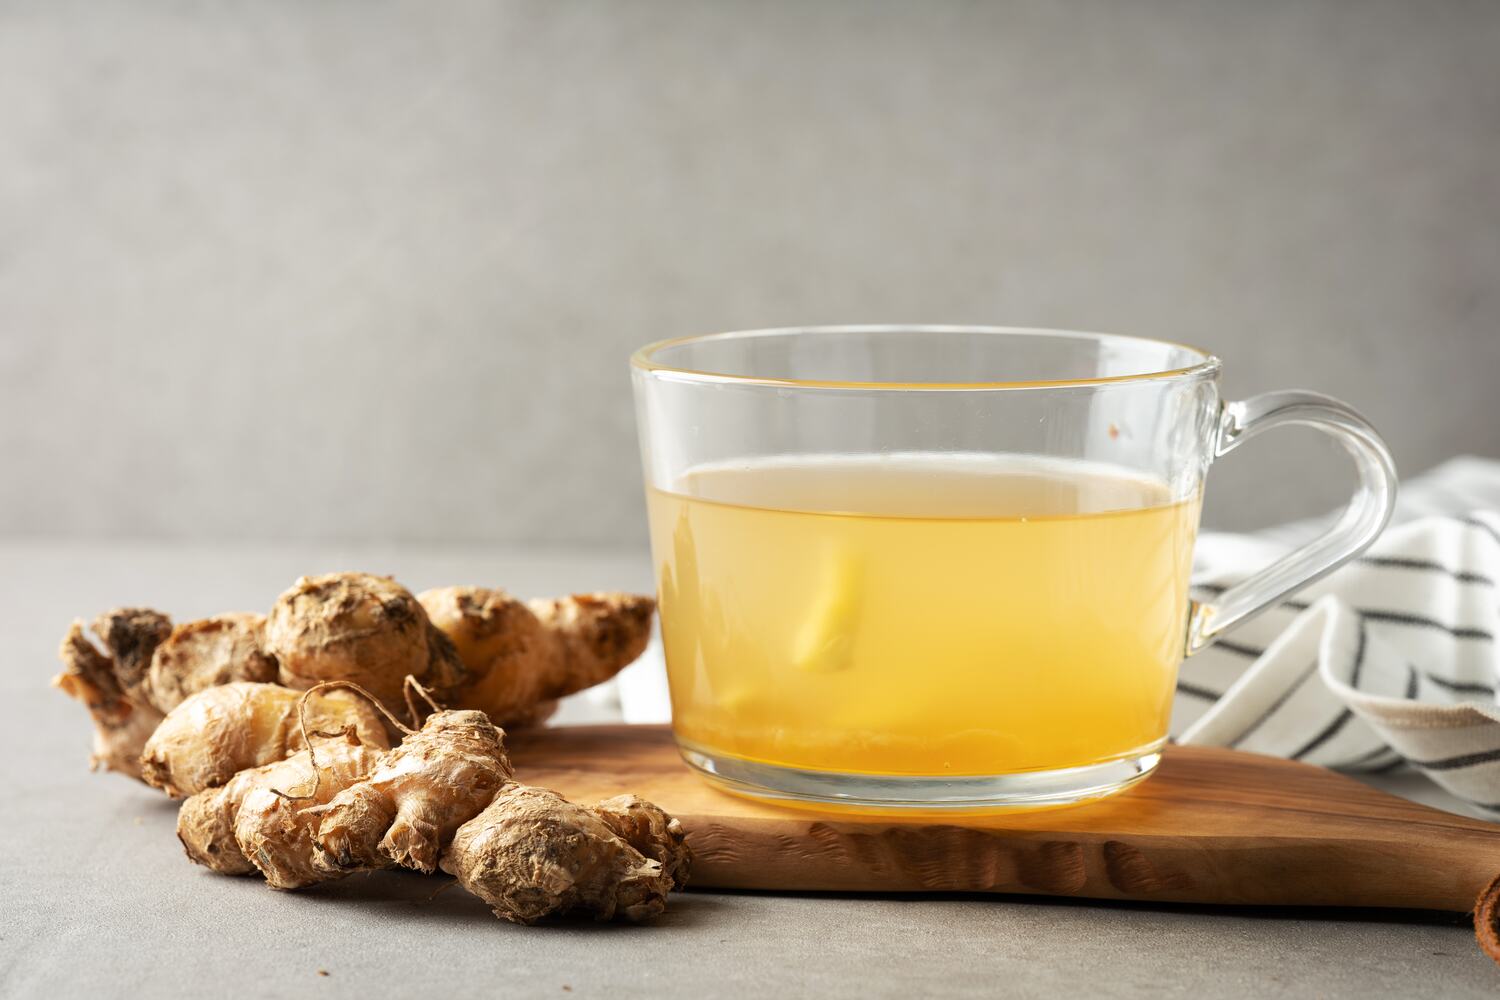 Ginger has several health benefits